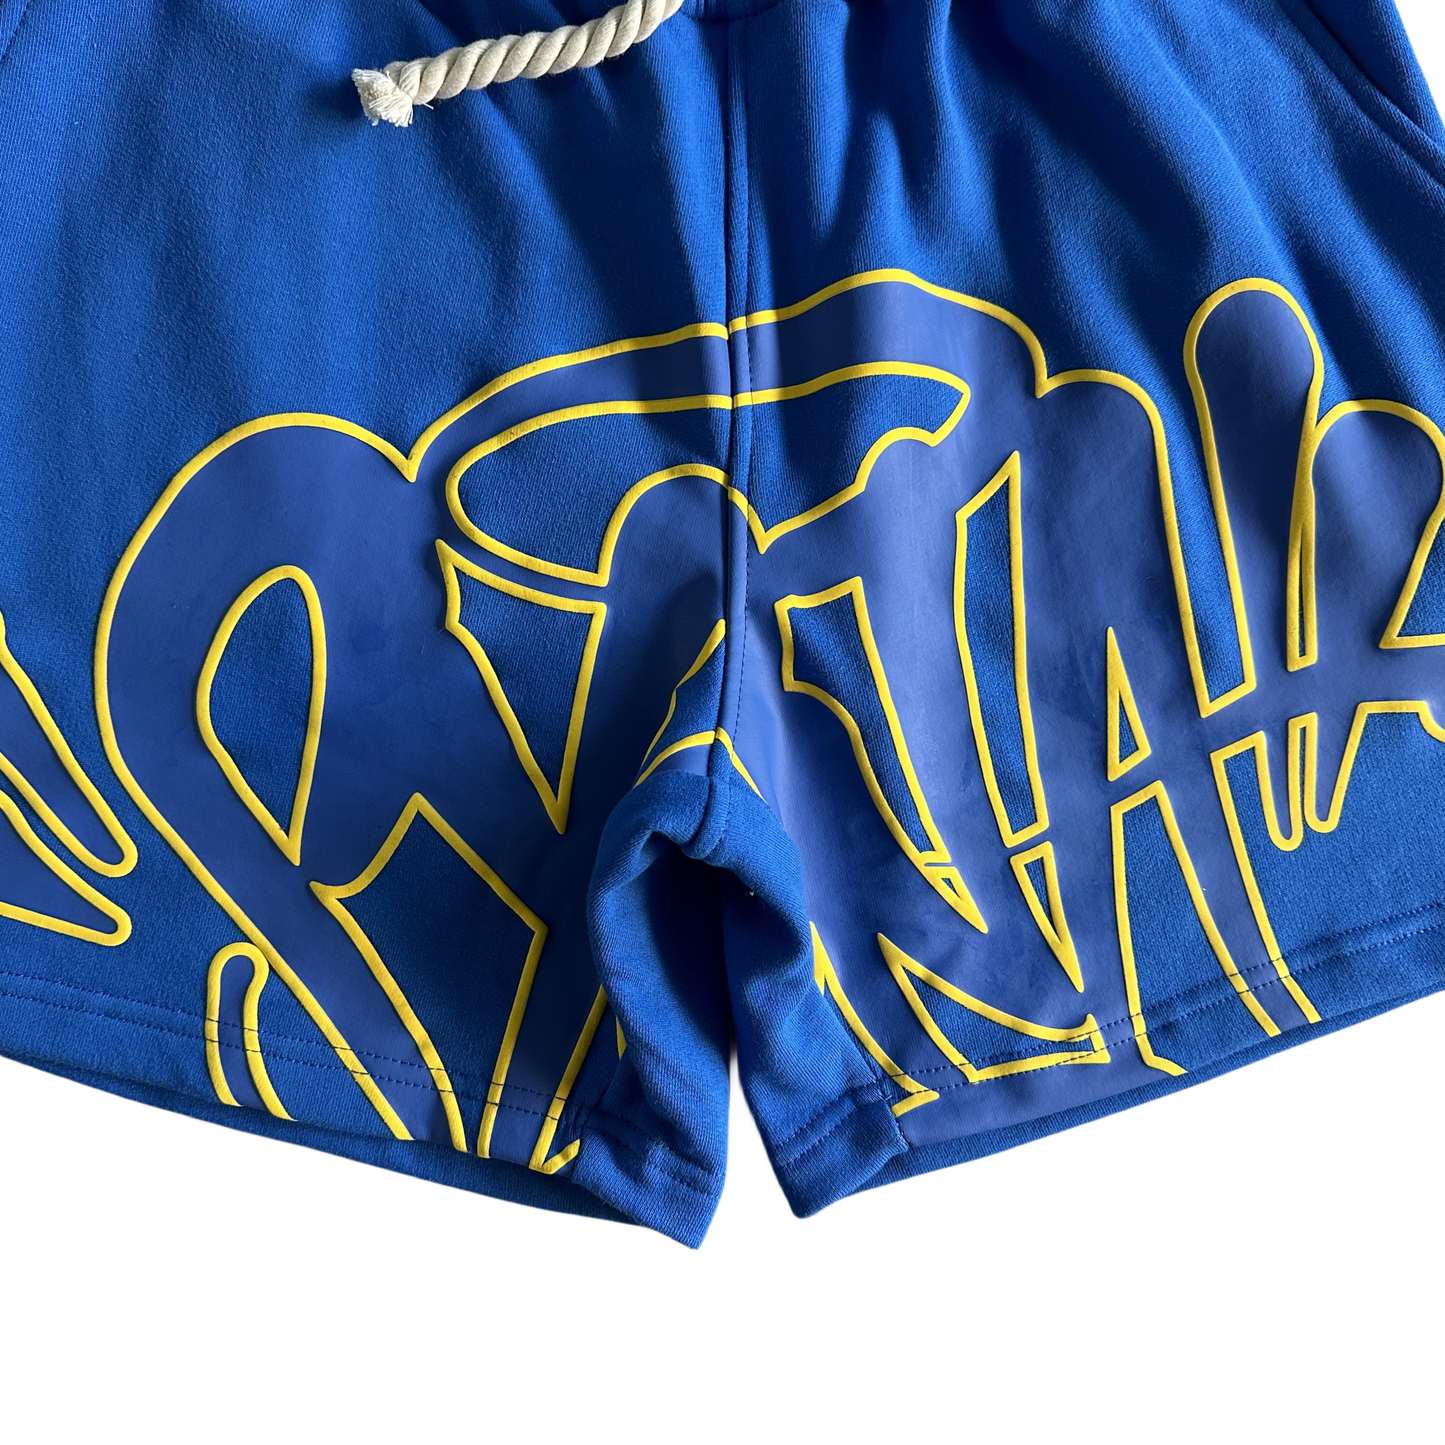 Syna World Men's Tee and Shorts Short Set Tracksuits - Blue/Yellow